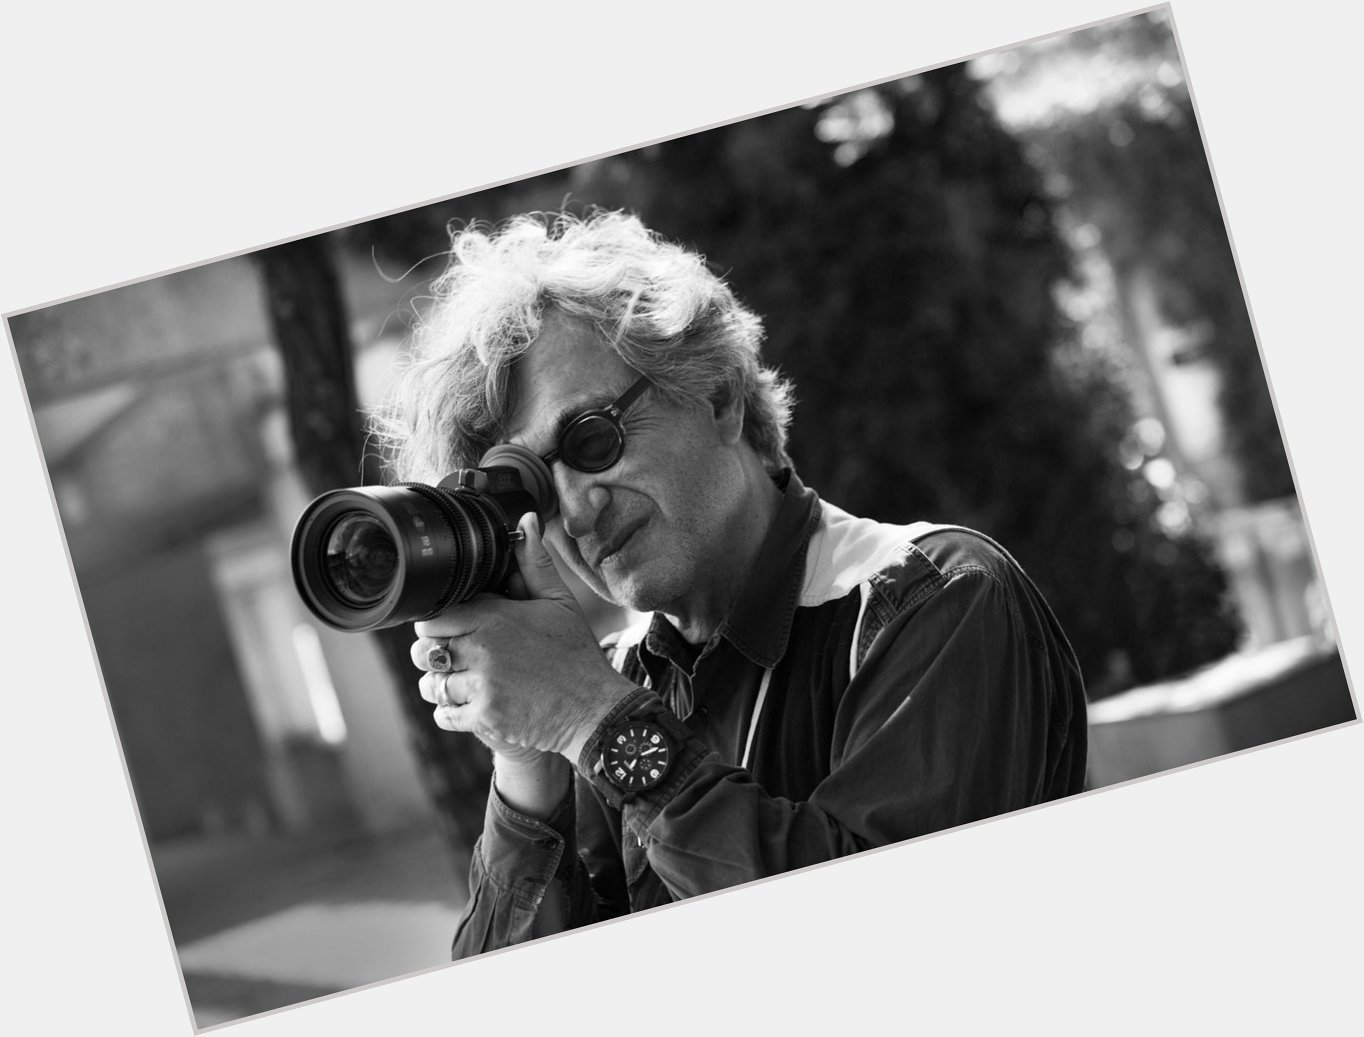 Happy birthday to one of my favourite directors Wim Wenders. 